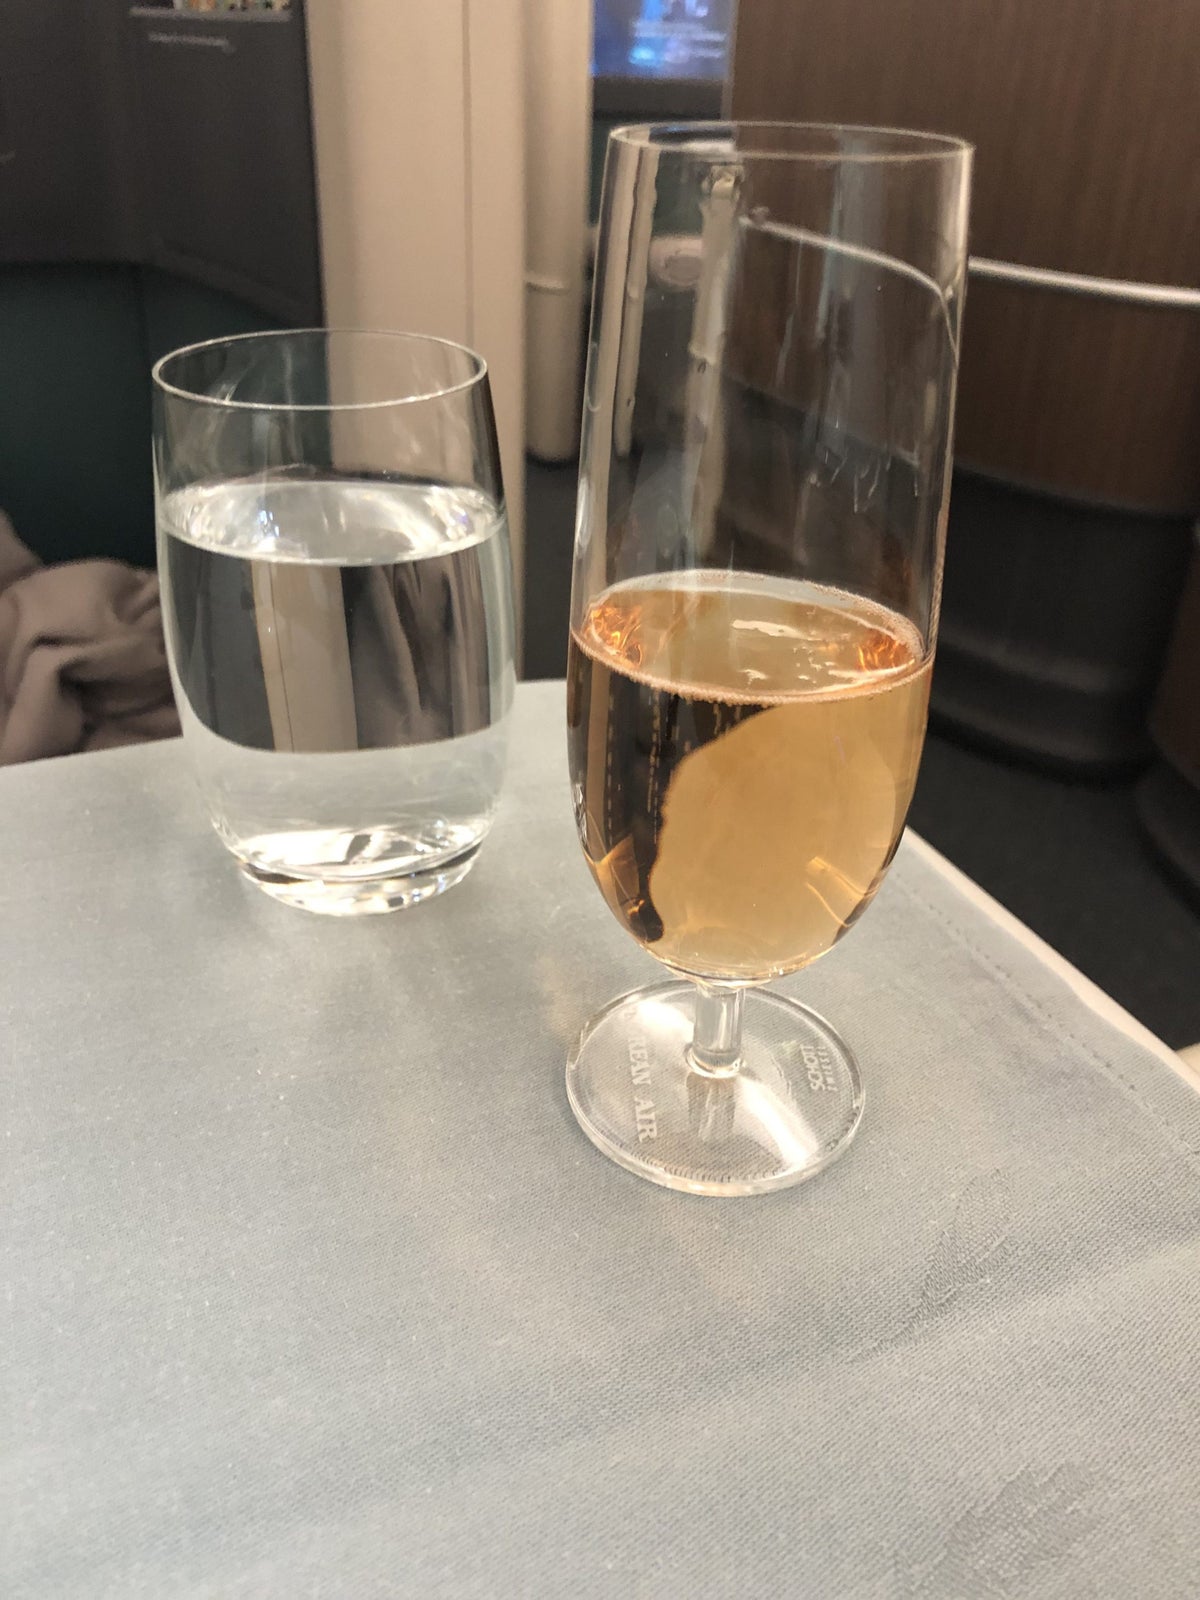 Korean Air first class champagne and water